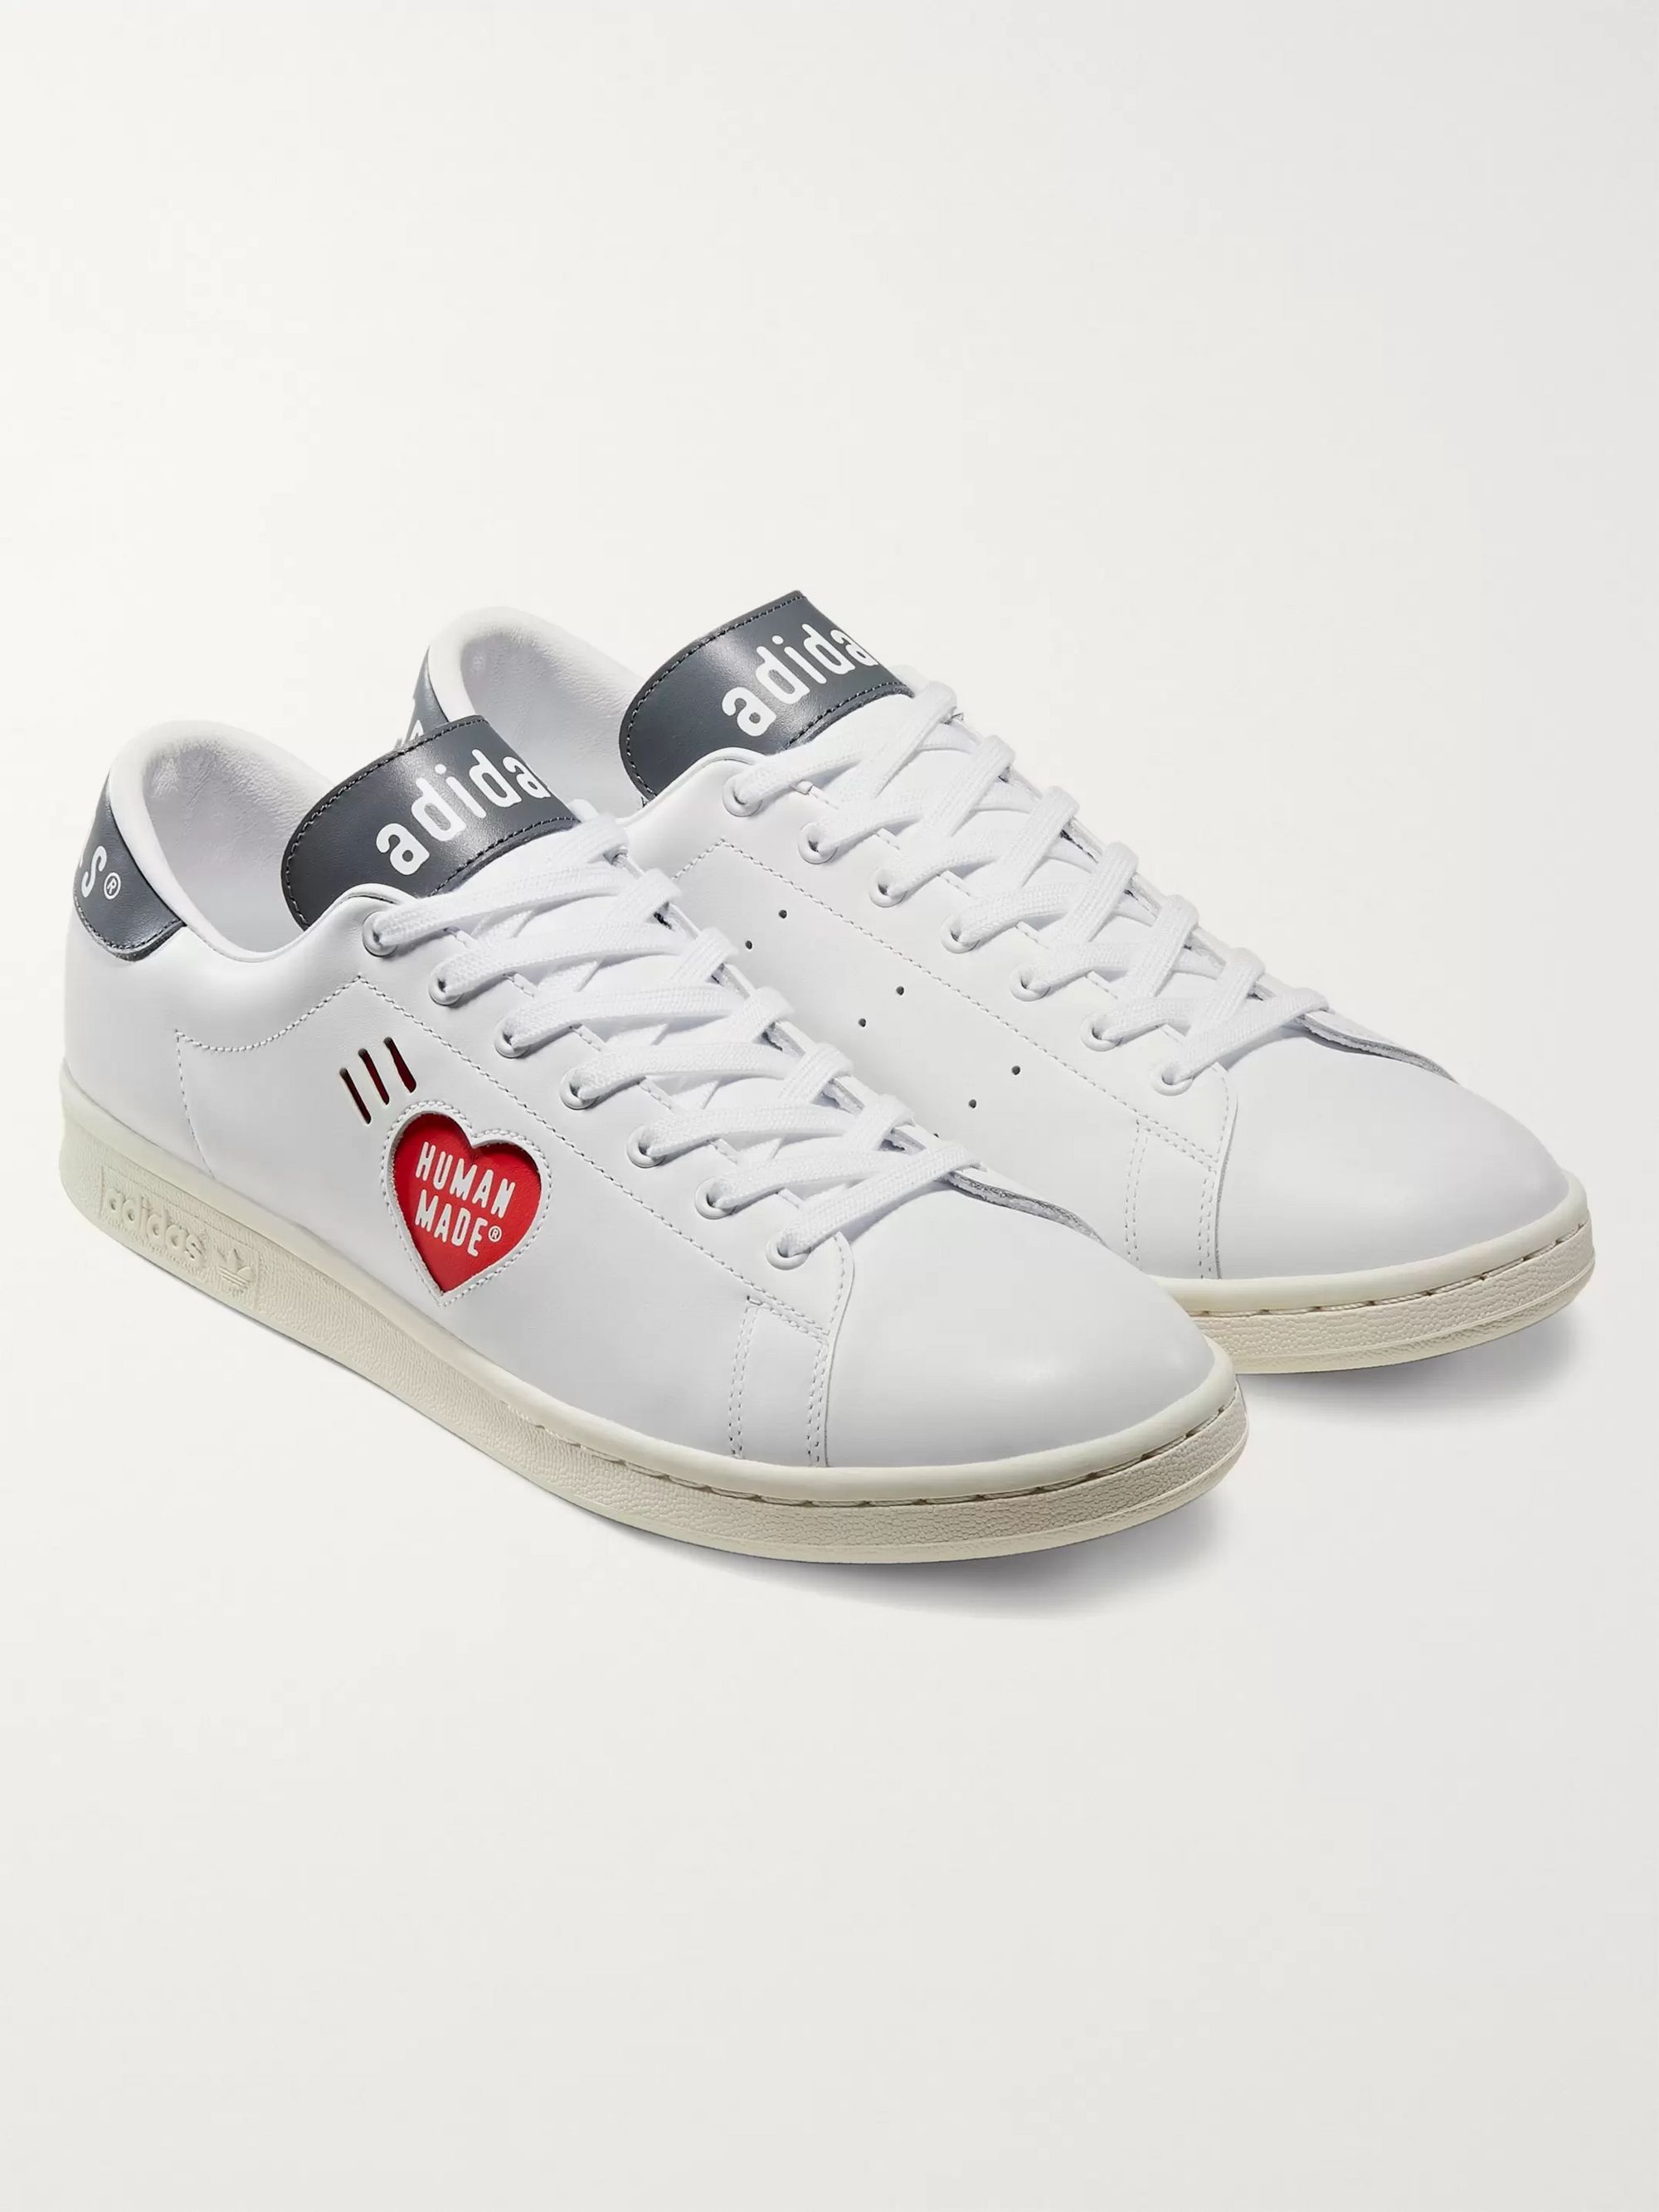 shoes stan smith